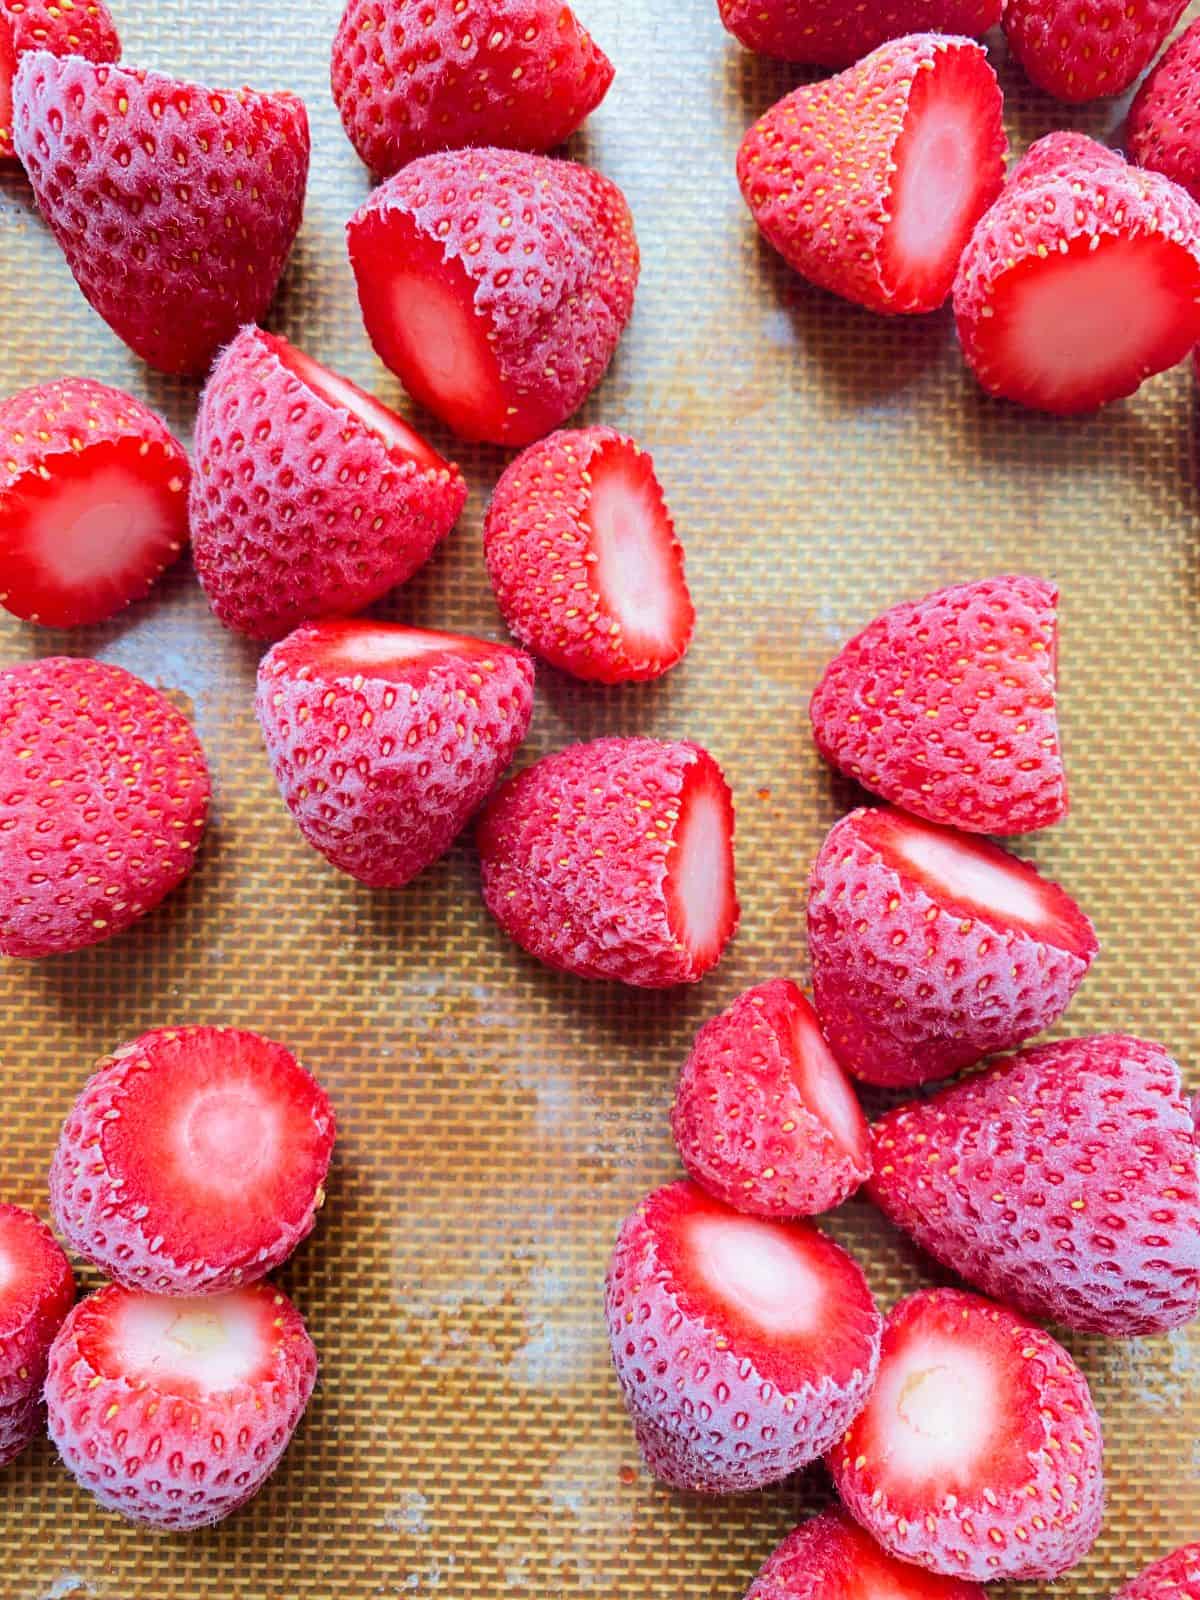 An image of frozen strawberries on a tray.